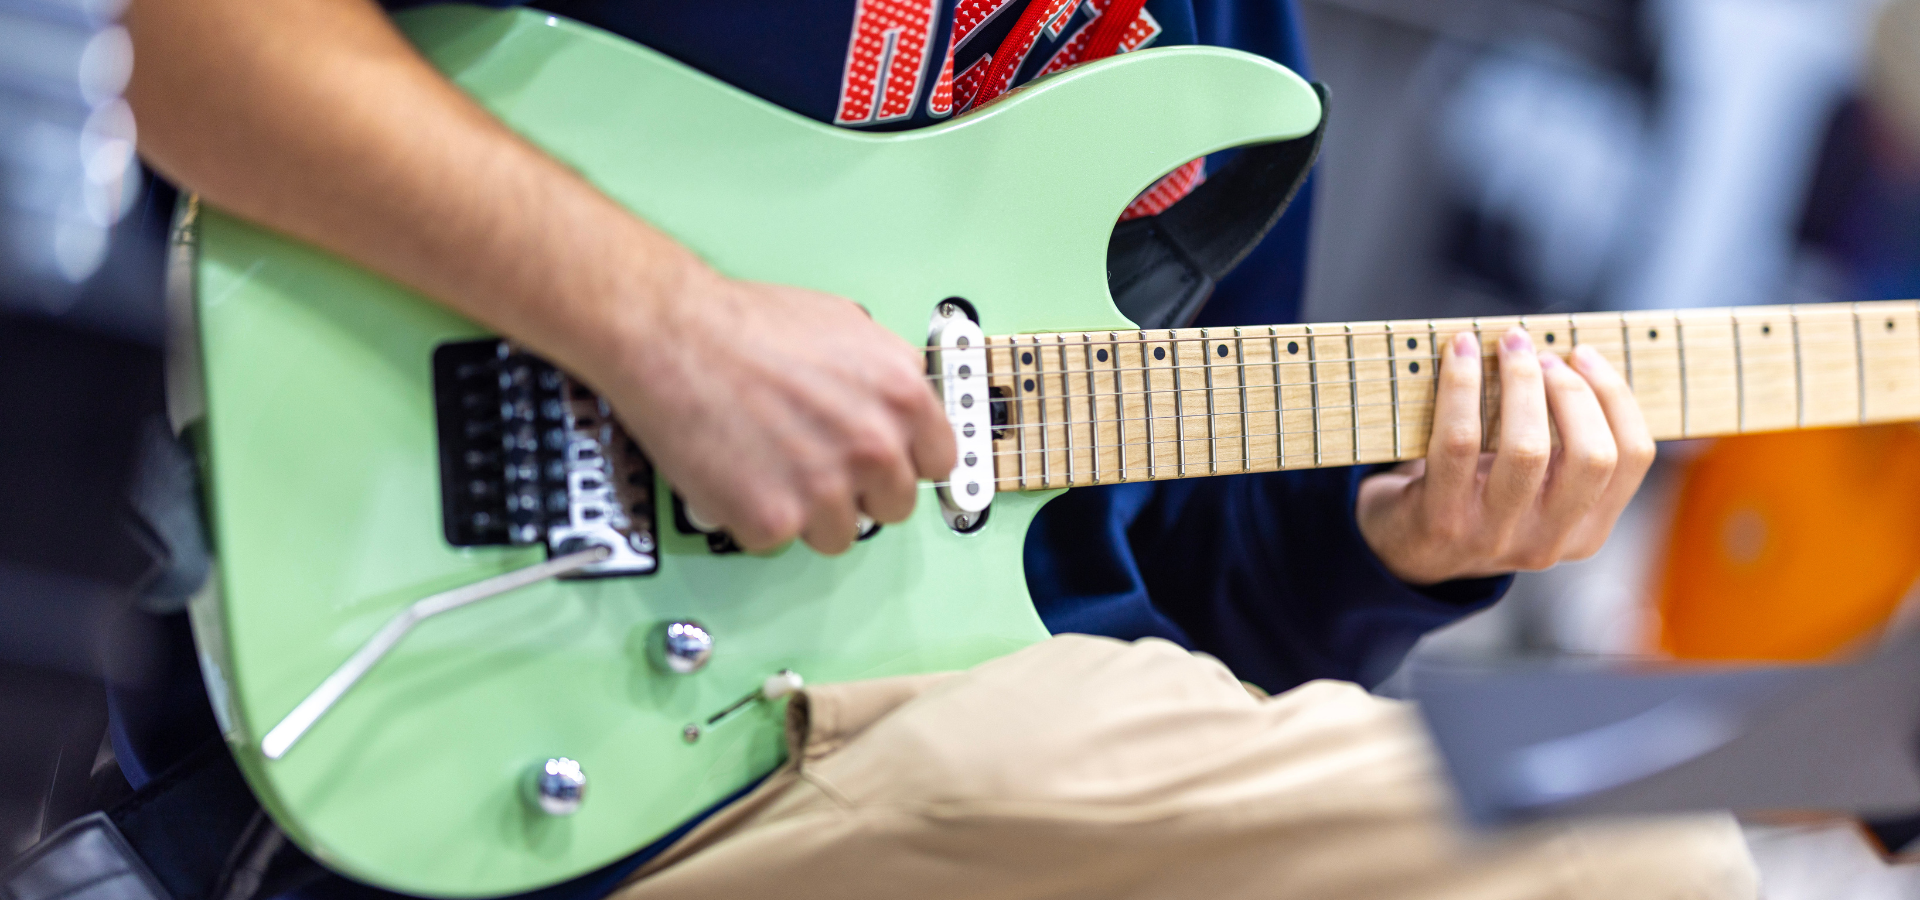 Musician playing a mint green electric guitar